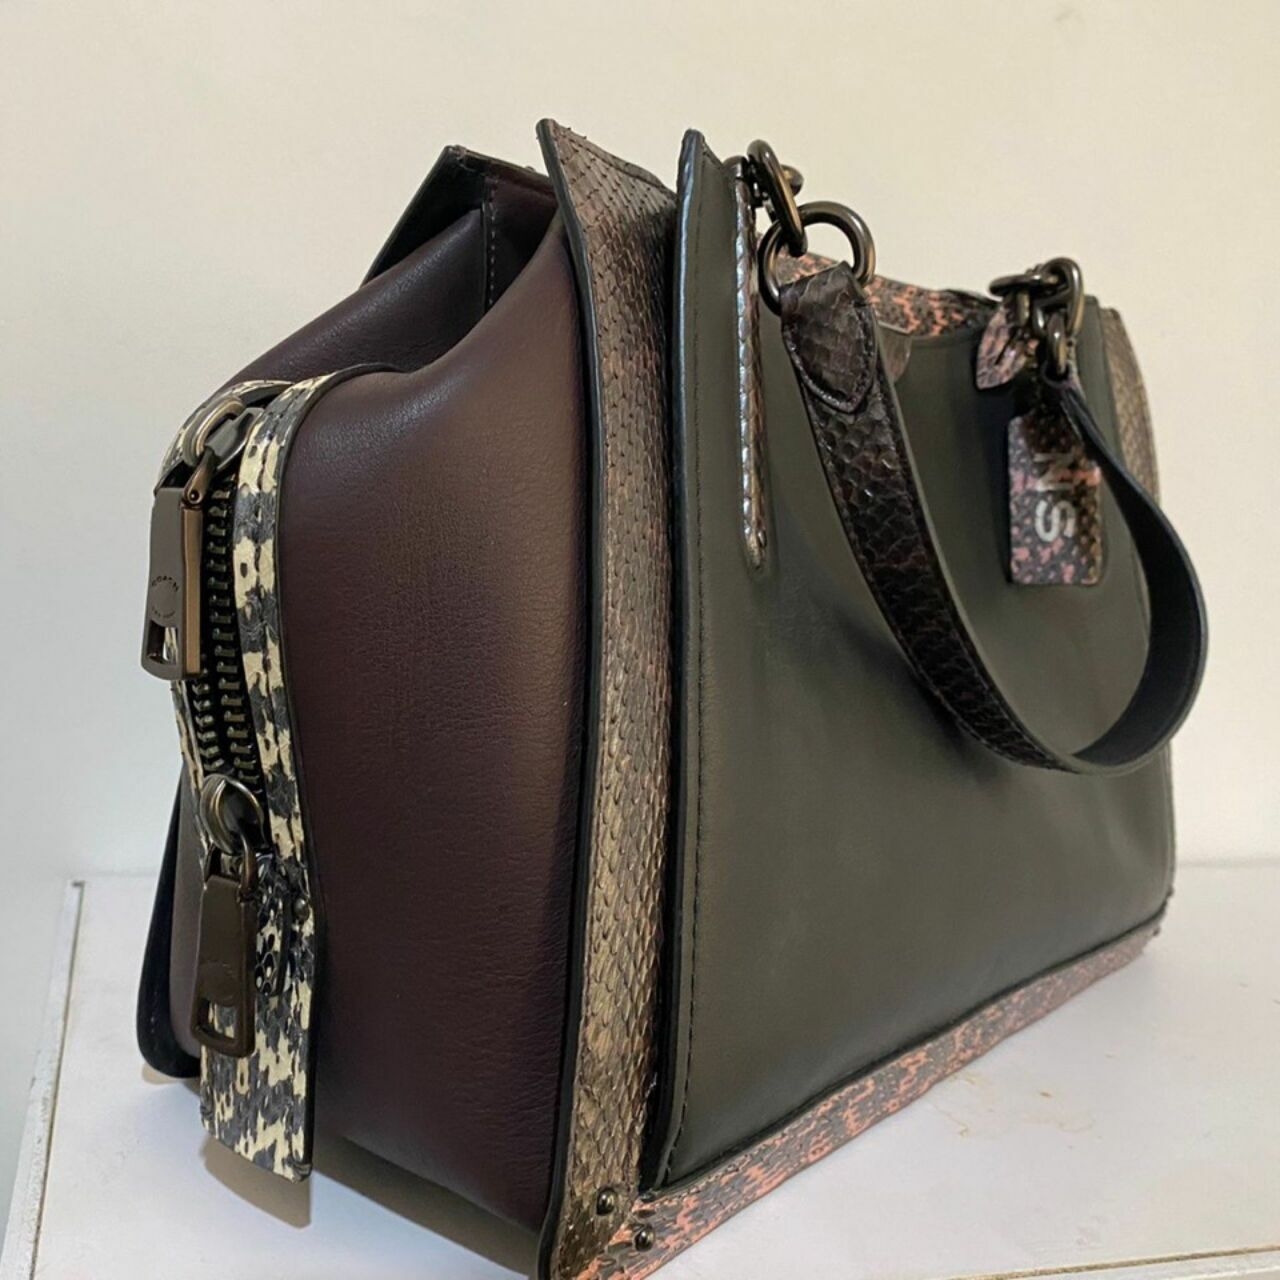 Coach dreamer 36 in colorblock with snakeskin black